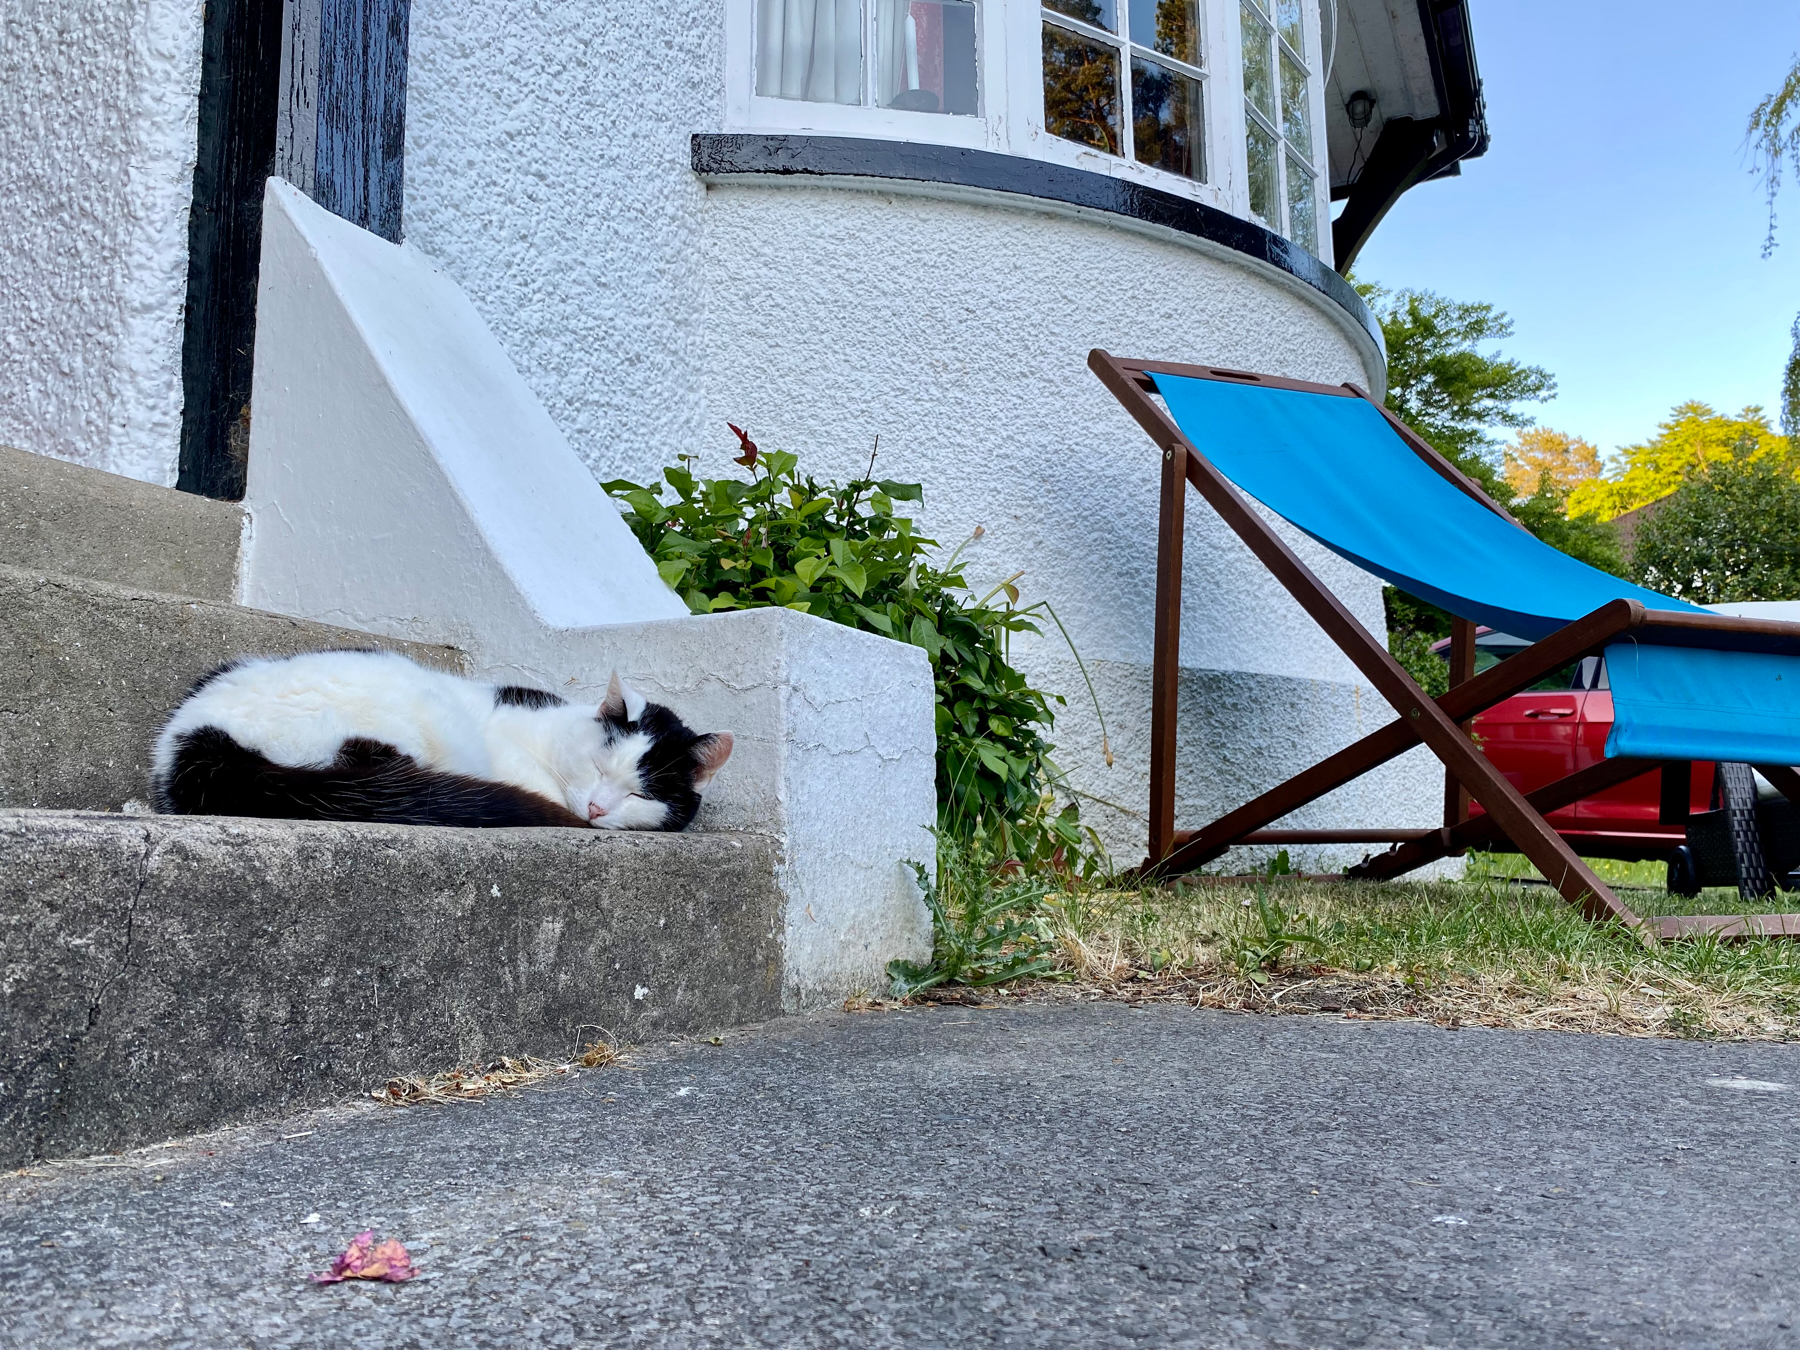 Black and white cat sleeping on concrete steps next to a deckchair 